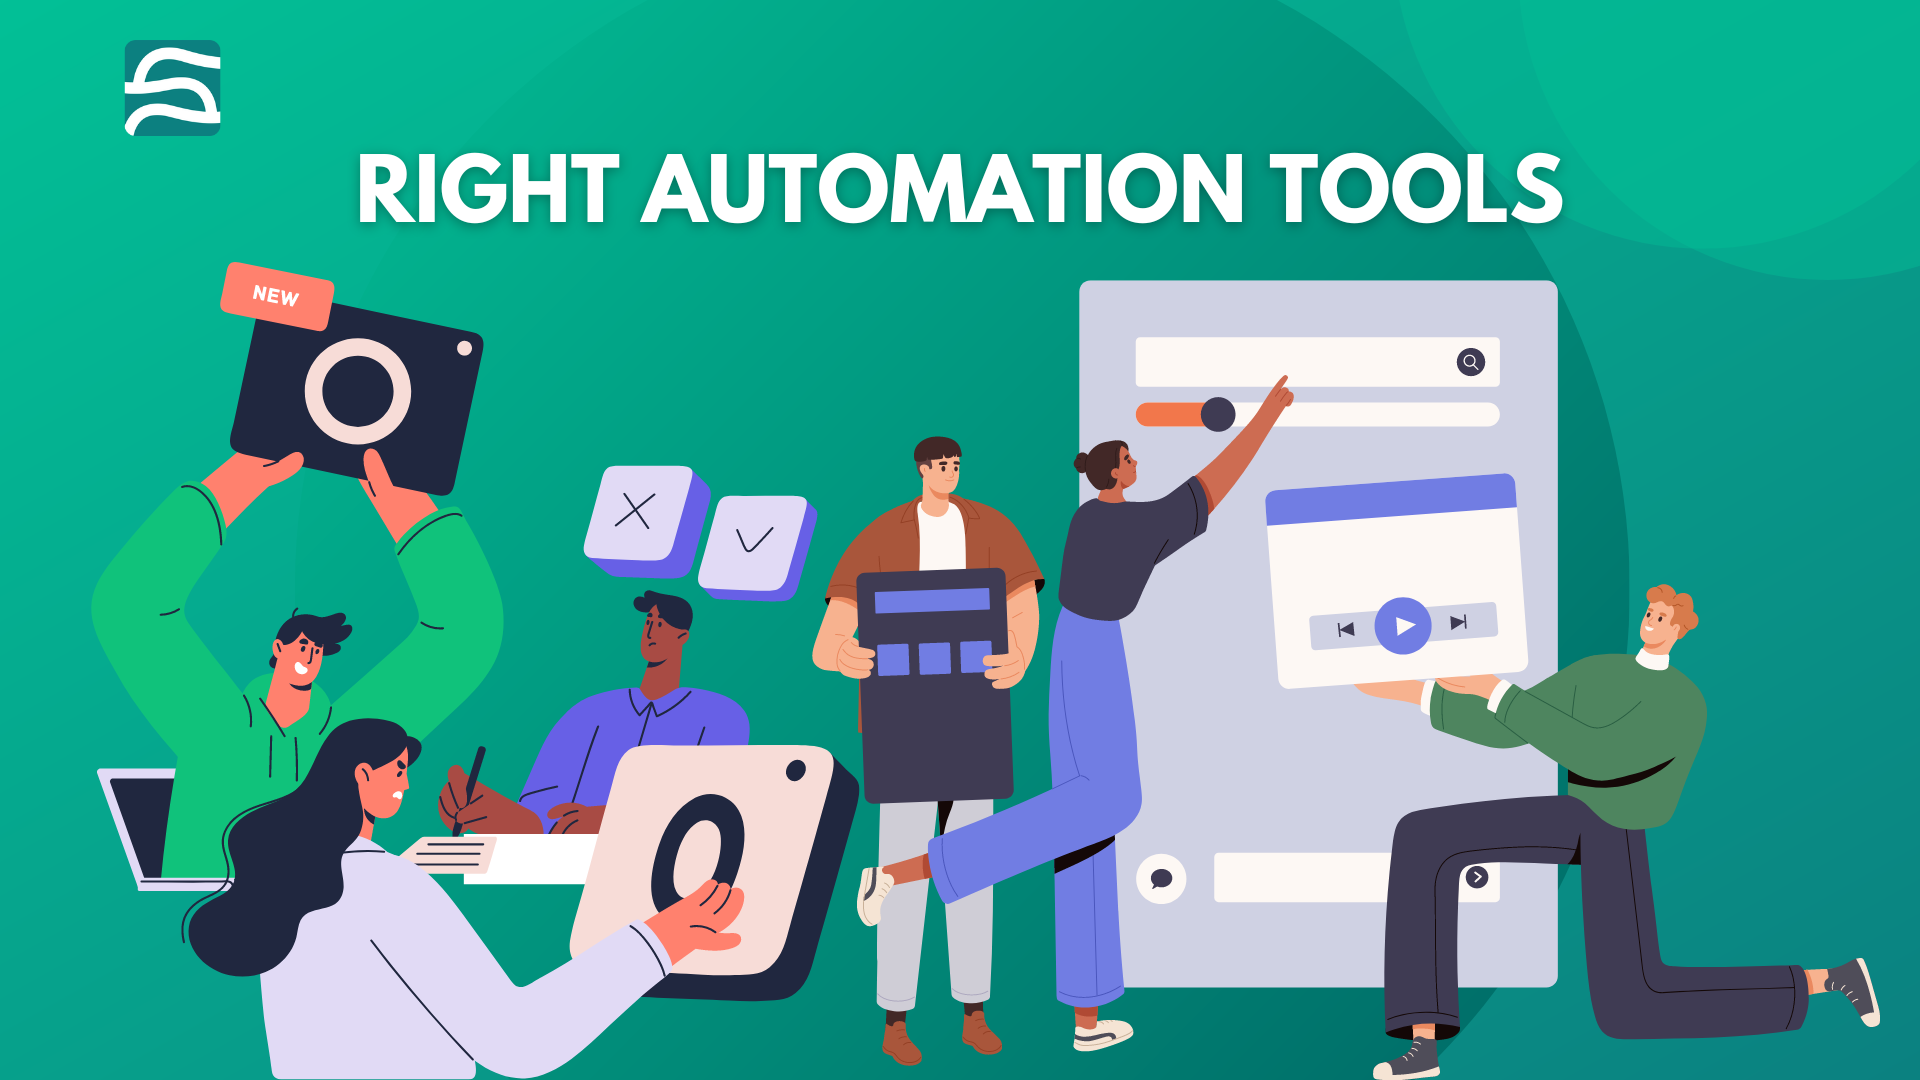 sales and marketing: Choosing the Right Automation Tools